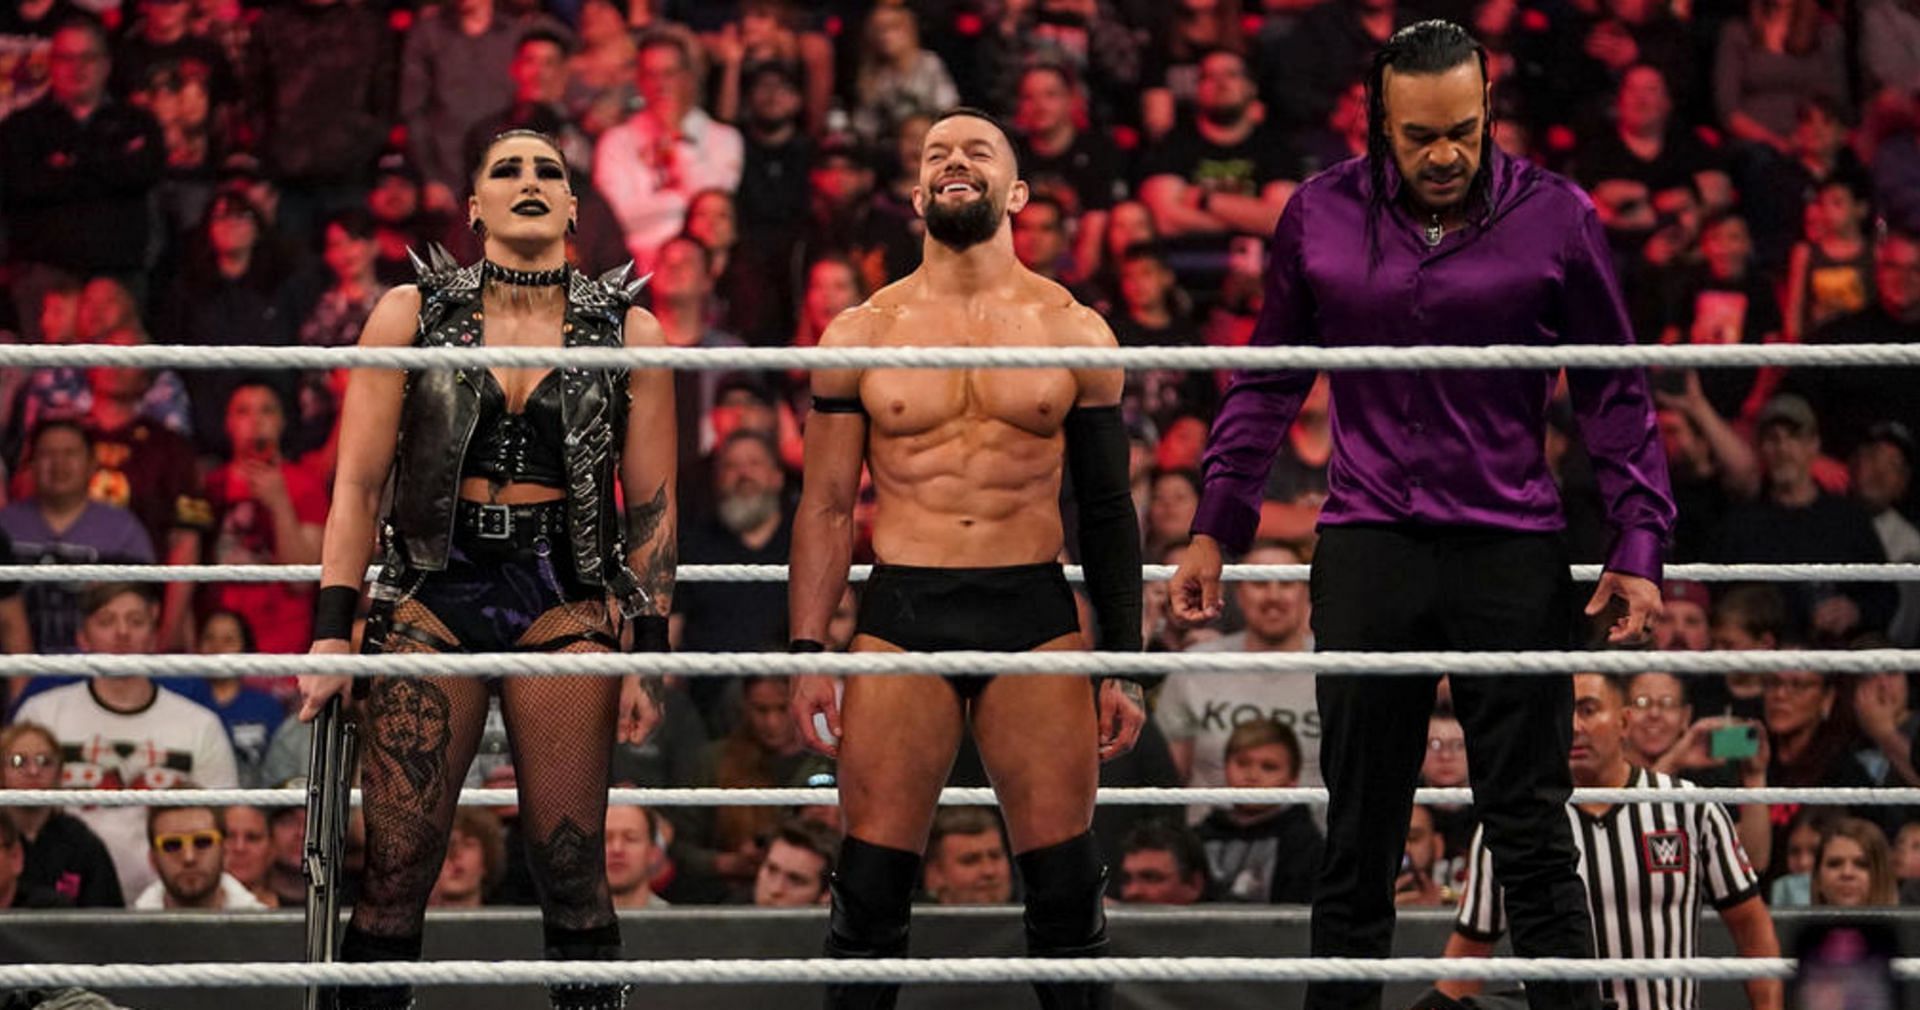 Finn Balor replaced Edge as a new member of The Judgment Day